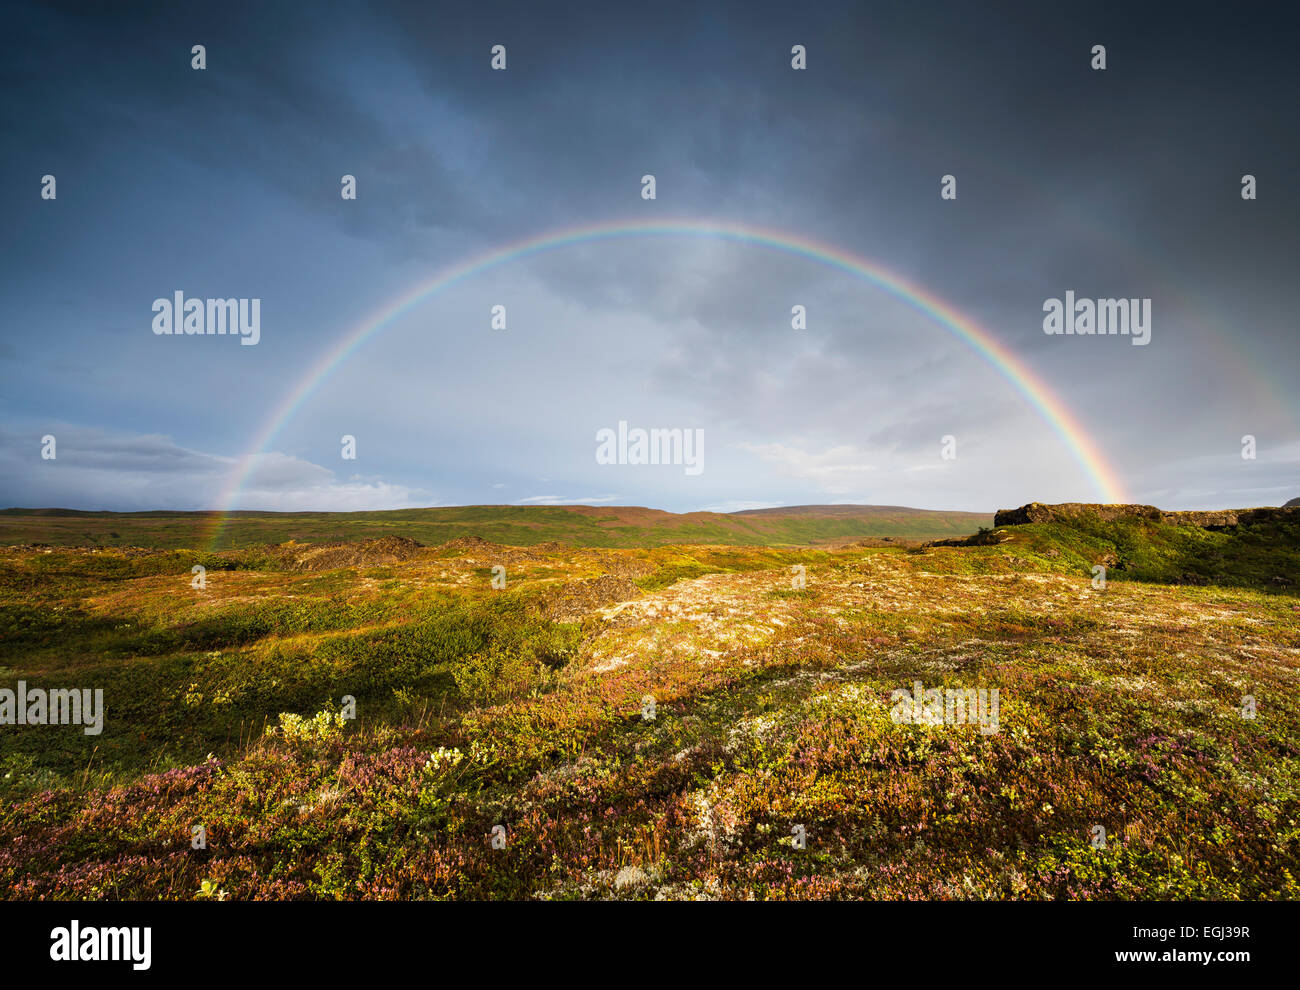 Tundra, rainbow, width, loneliness, atmosphere, light, clouds, sky, ground, flowers, vegetation, the north, Stock Photo